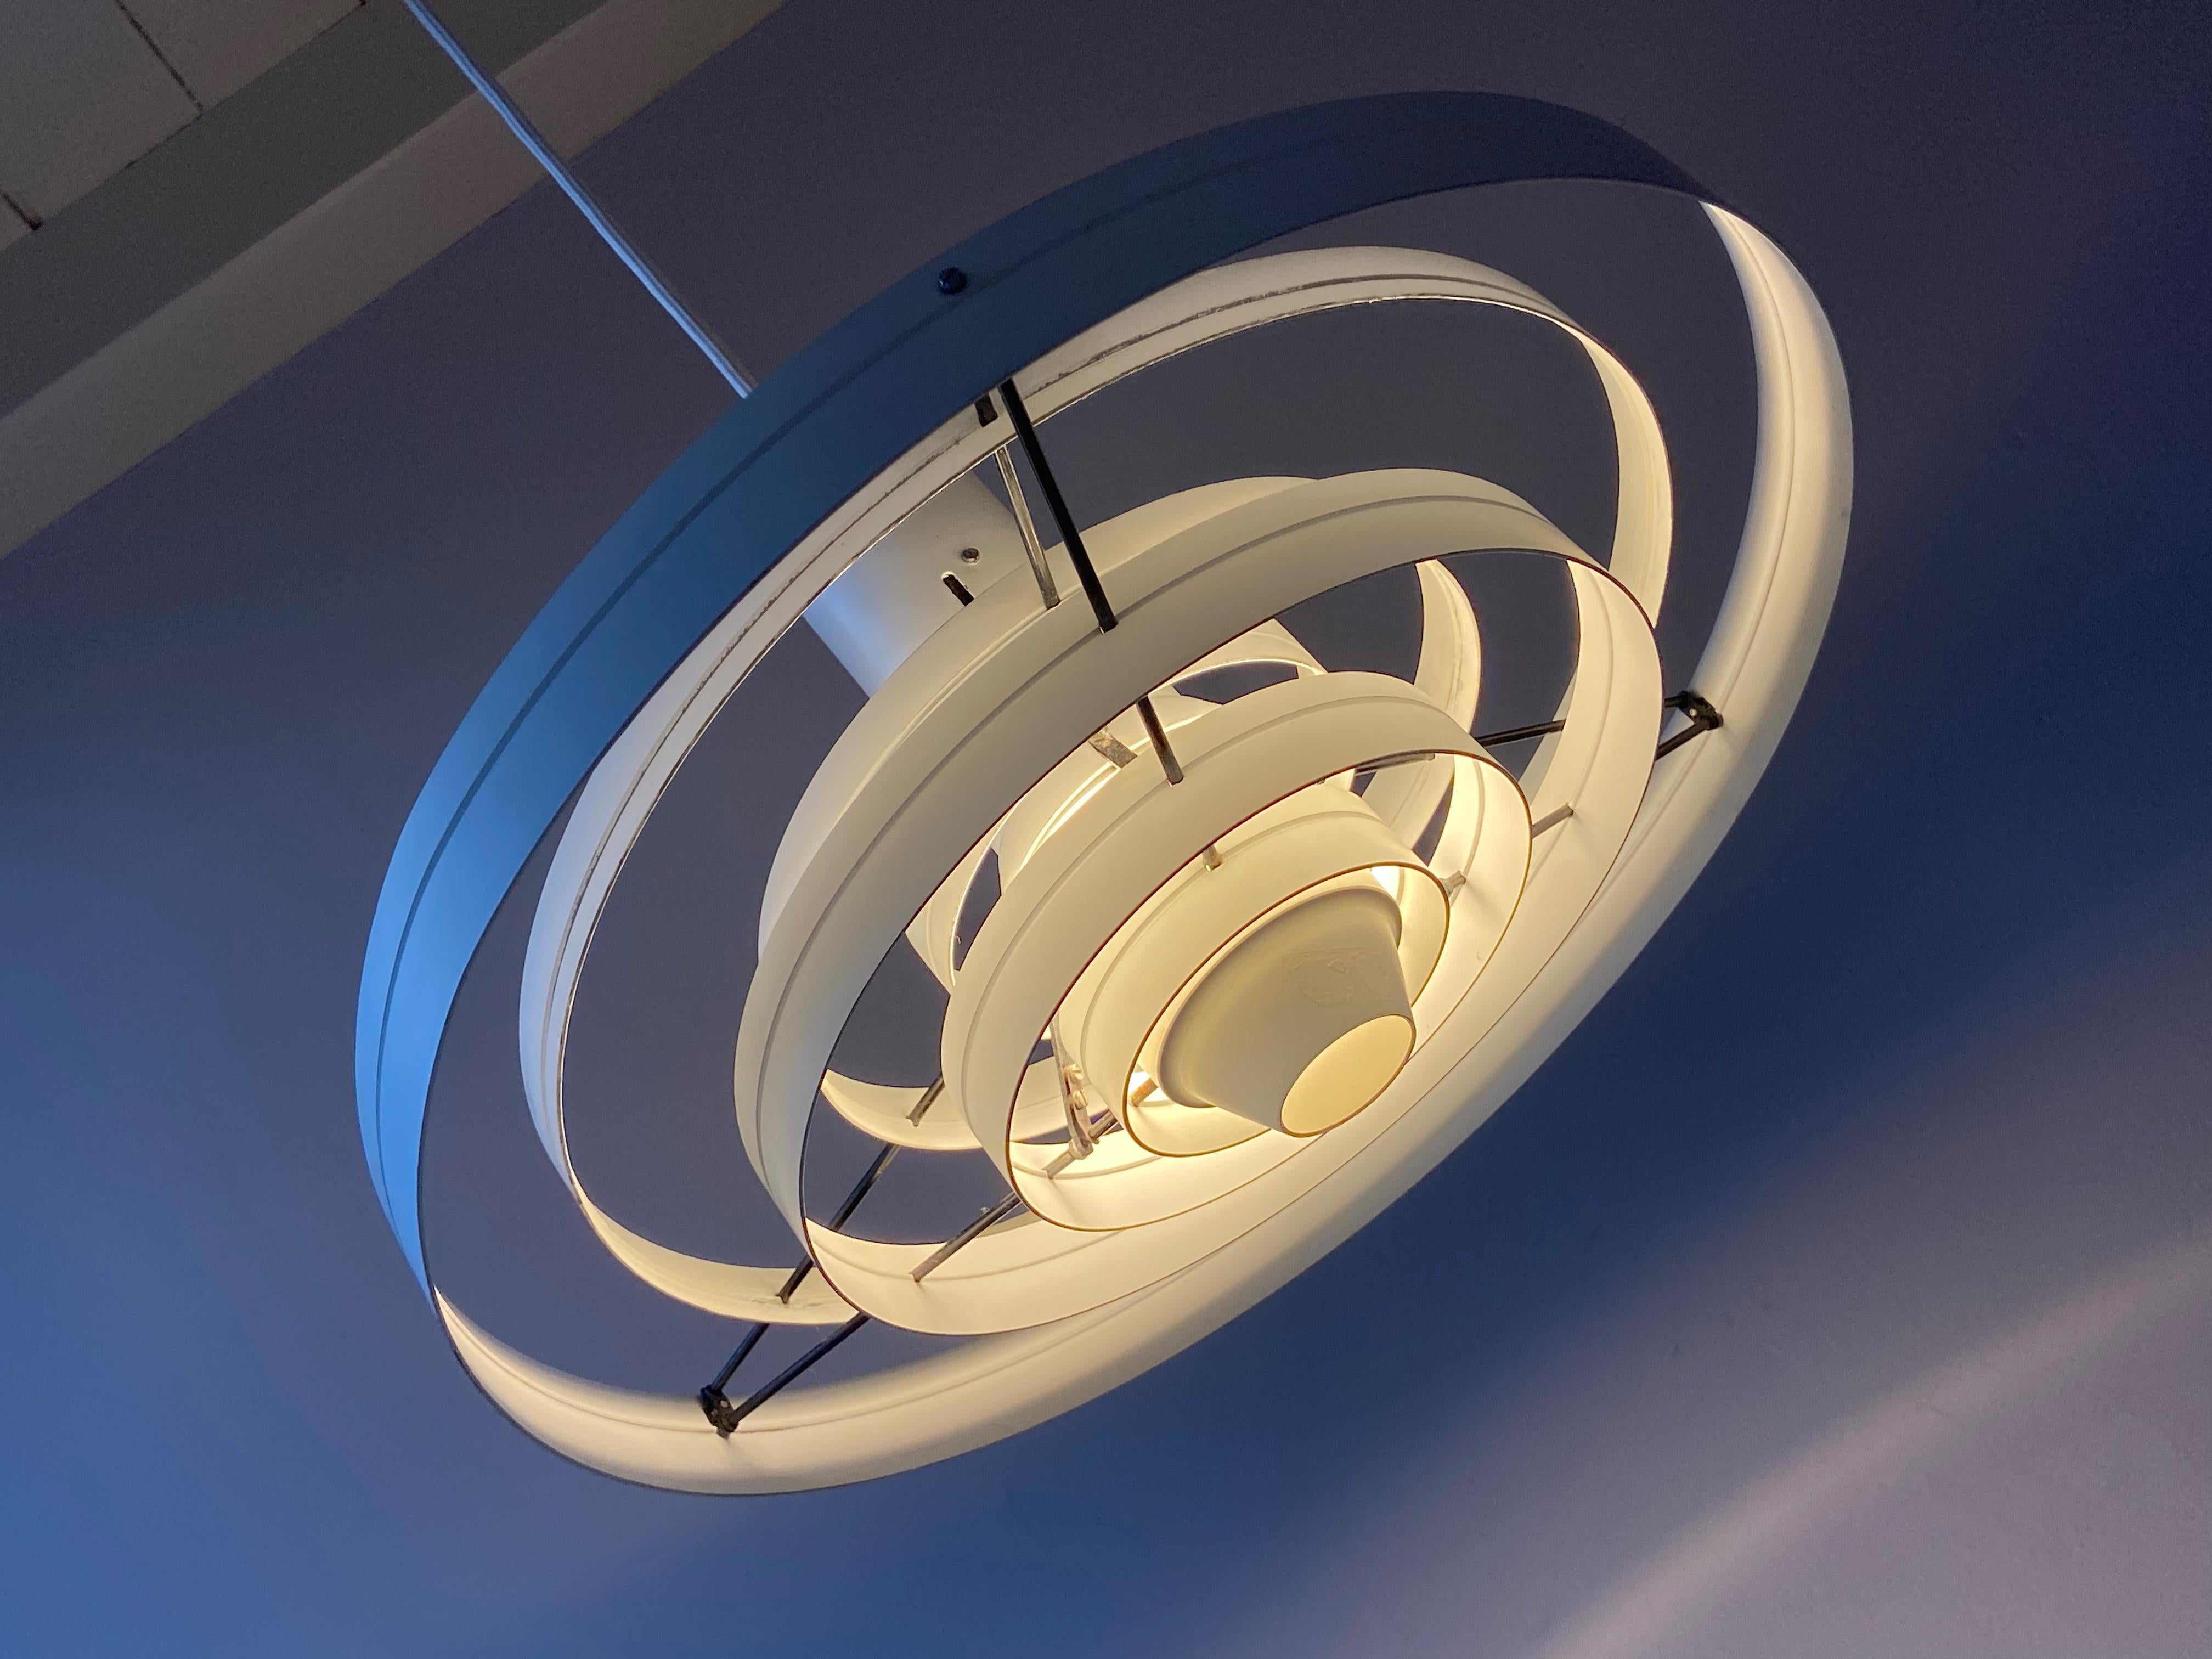 Very nice white metal Fibonacci pendant lamp by pendant lamp by Sophus Frandsen for Fog & Mørup, Denmark. With the original company sticker no parts missing.
New wirering and E26/27 Edison socket so ready to use world wide.
